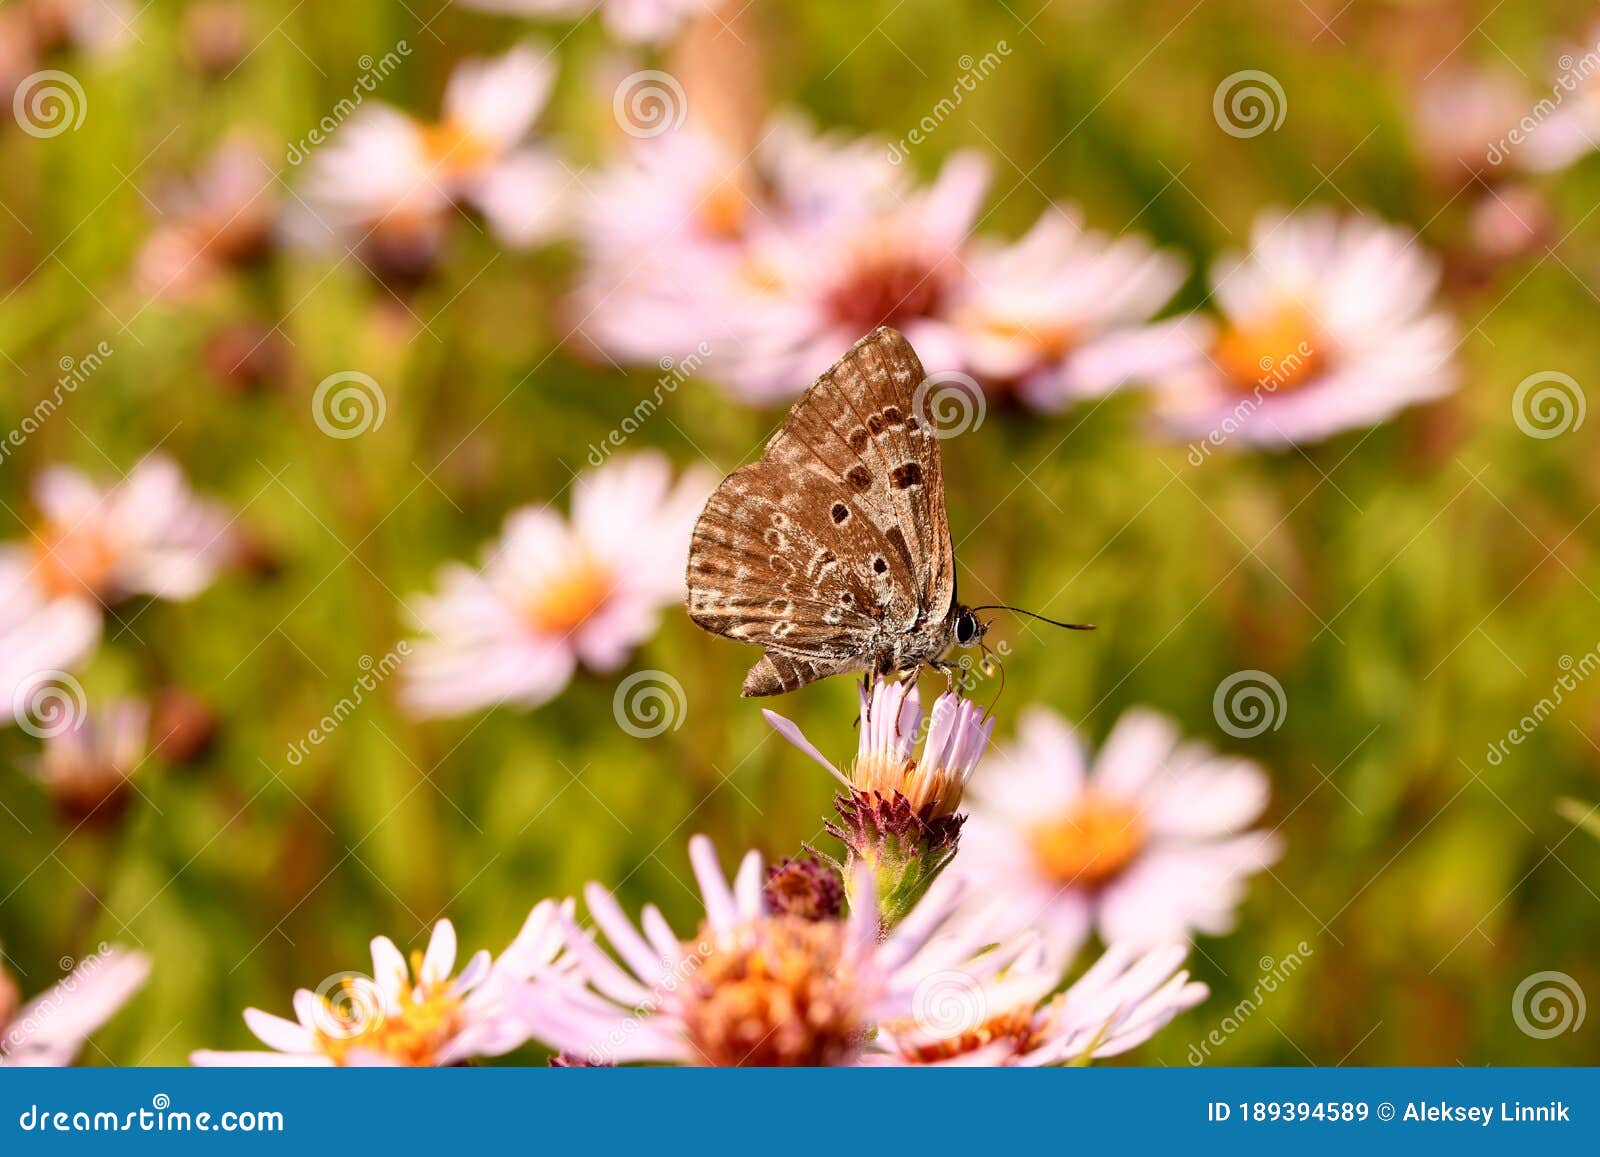 butterflies pollinate the flowers